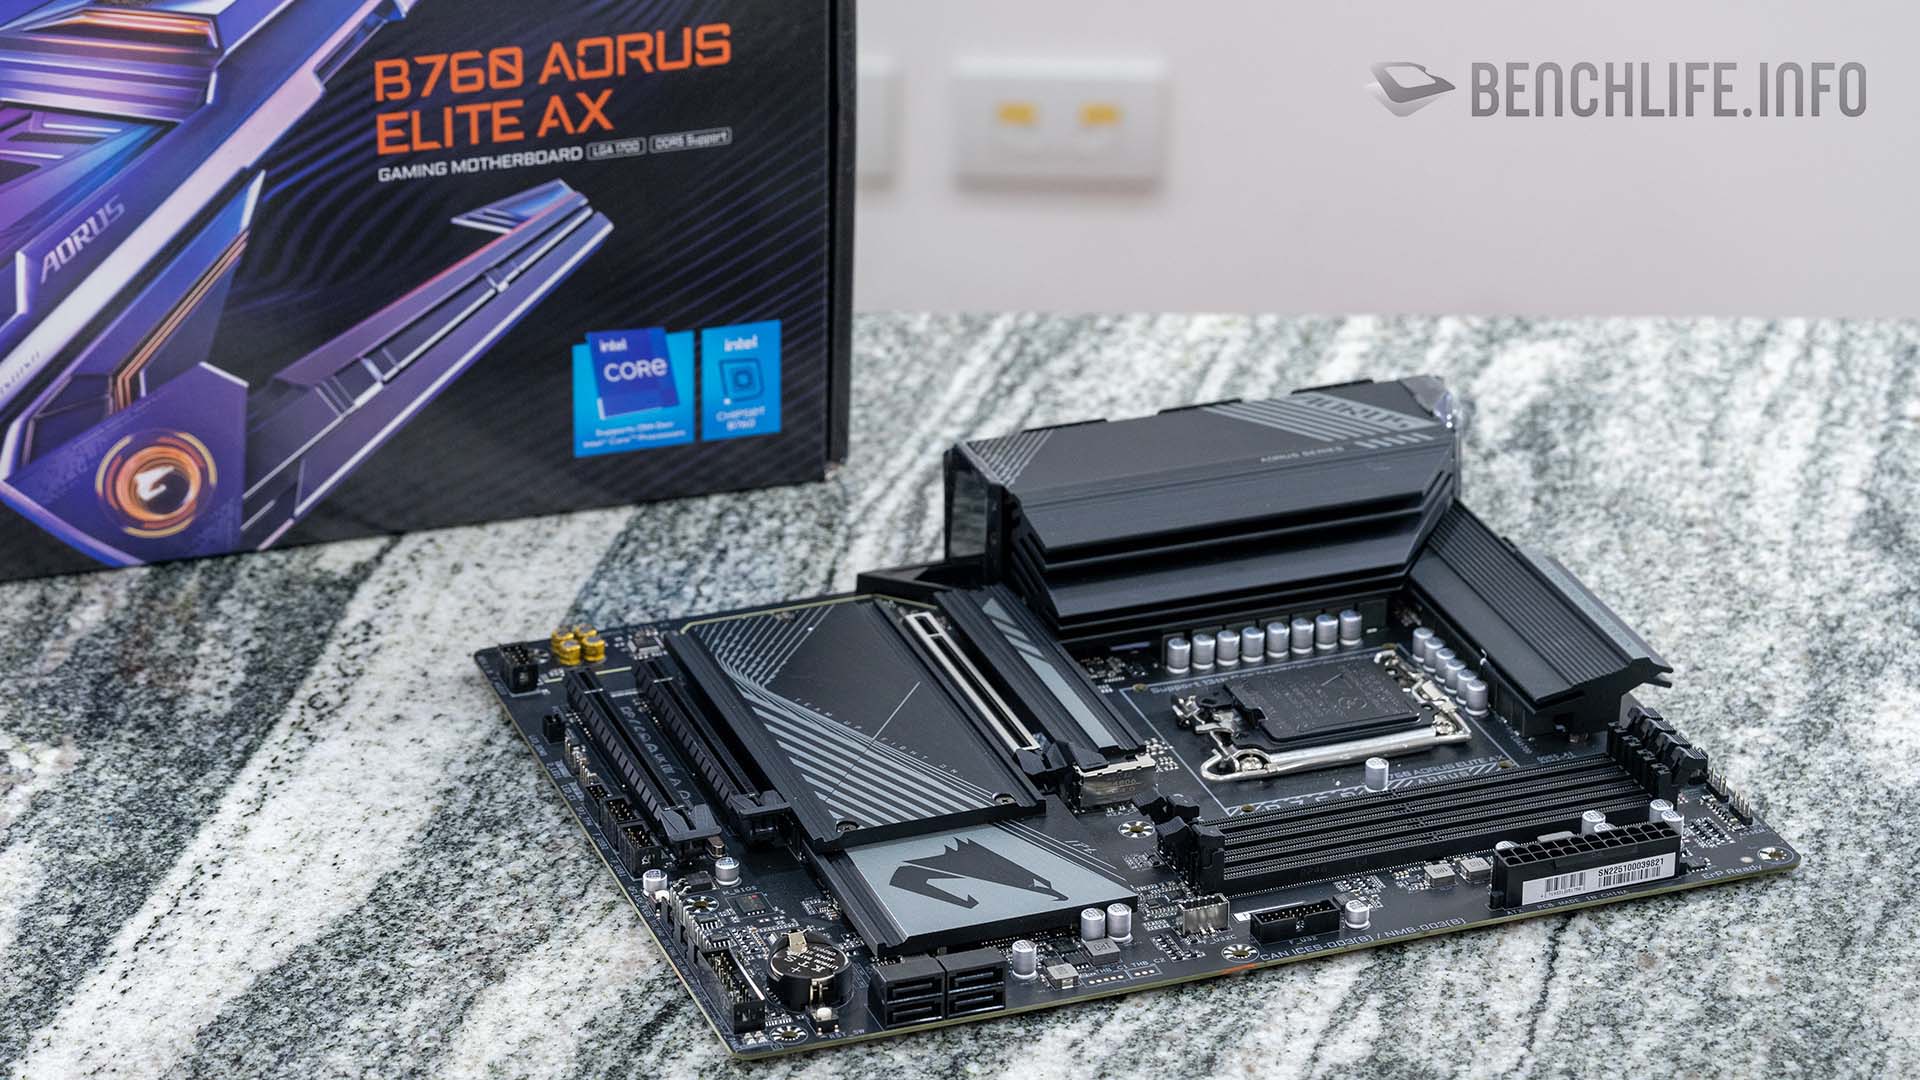 Tested on GIGABYTE B760 AORUS ELITE AX motherboard with Intel Core i5-13500 processor